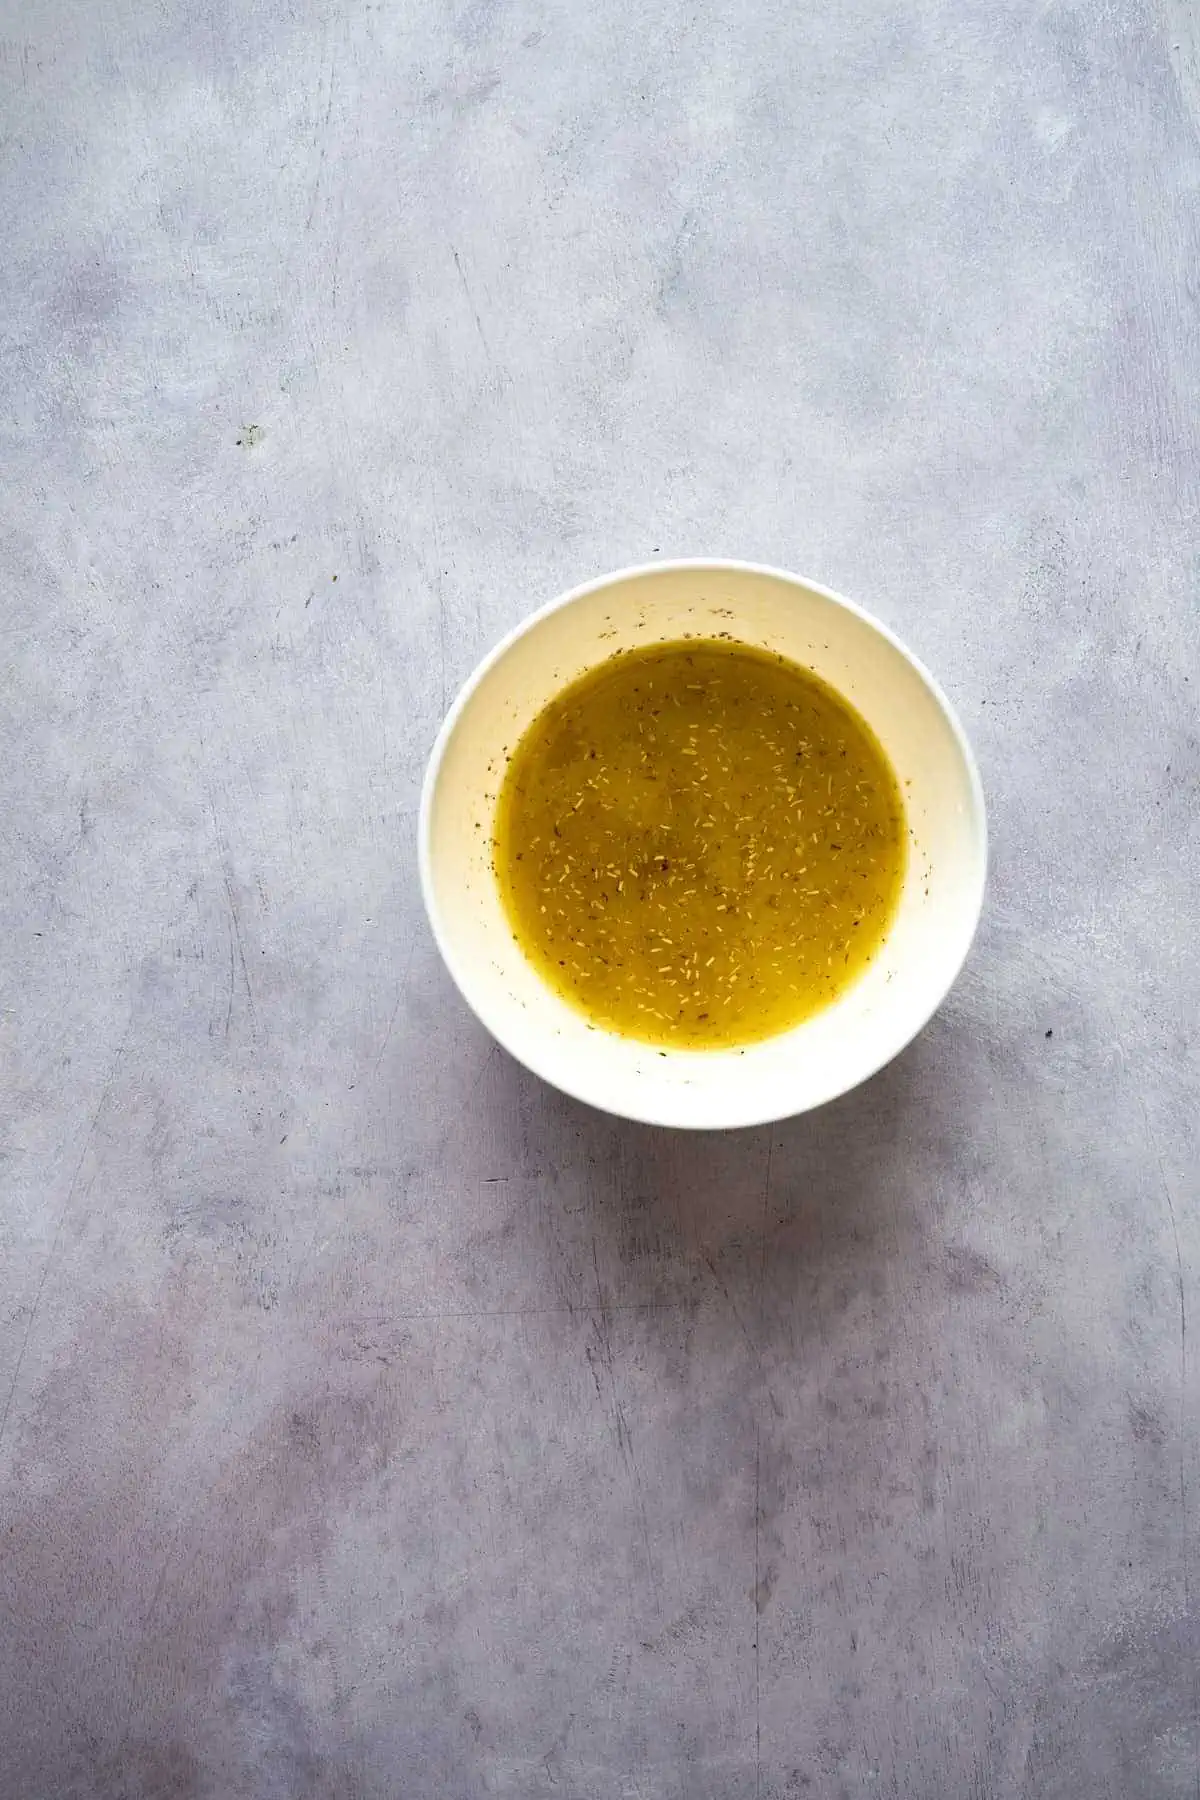 Simple salad dressing in a bowl.